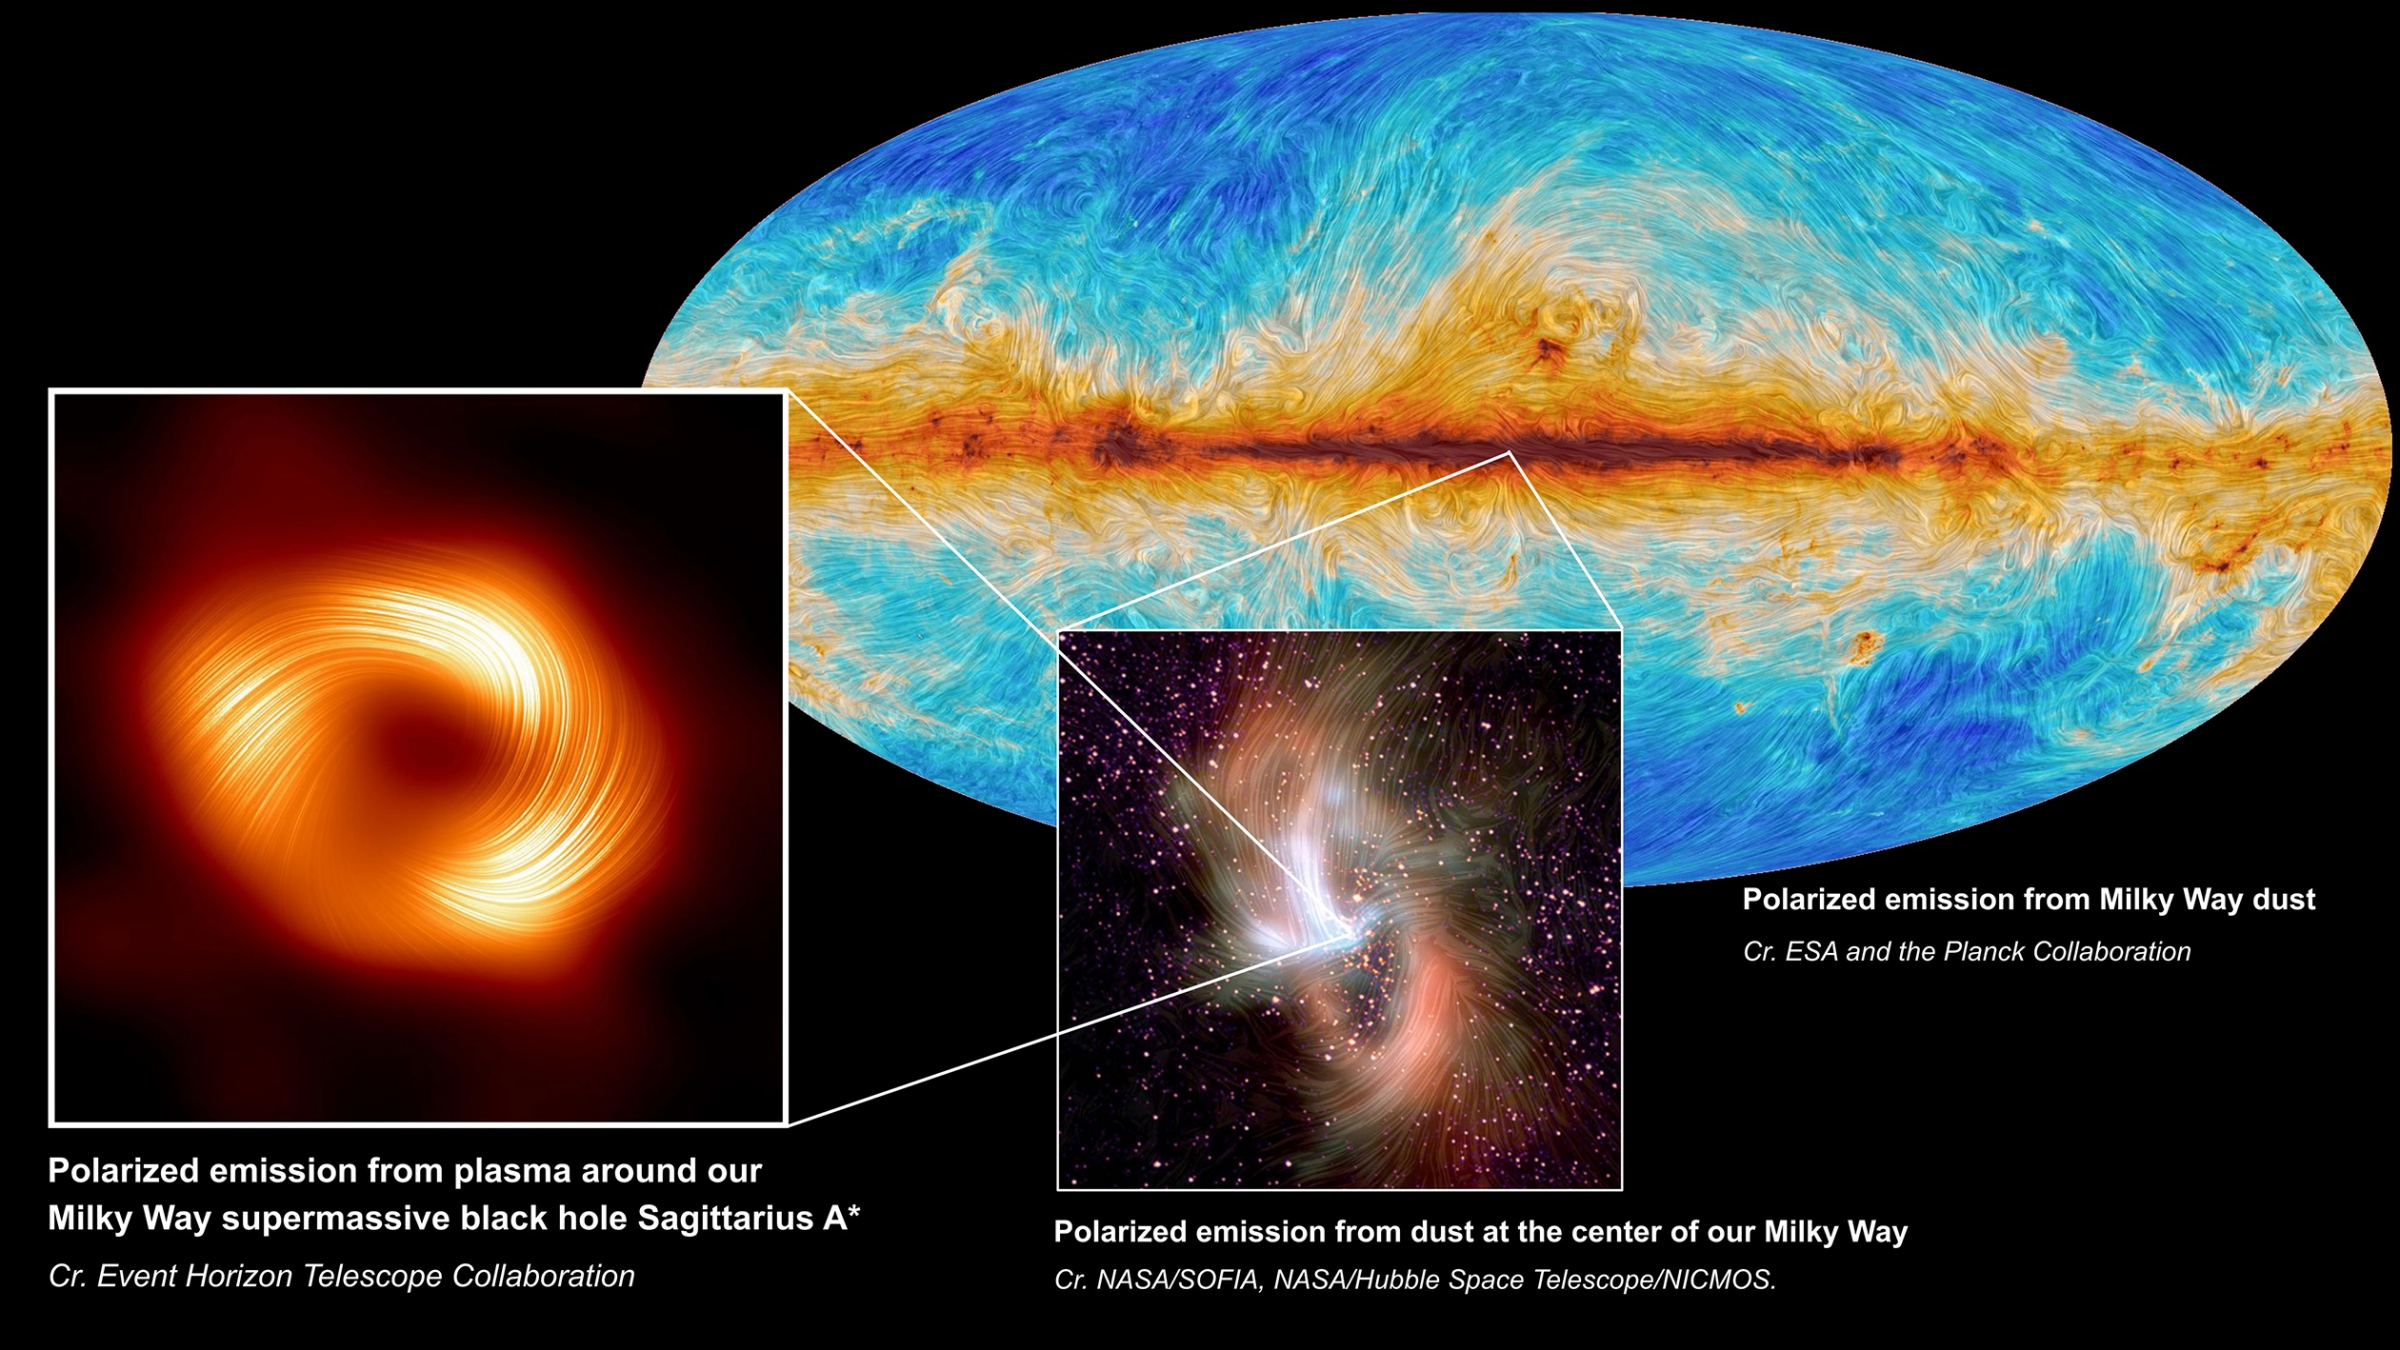 supermassive black hole at the center of the Milky Way Galaxy Sagittarius A* is seen in polarized light